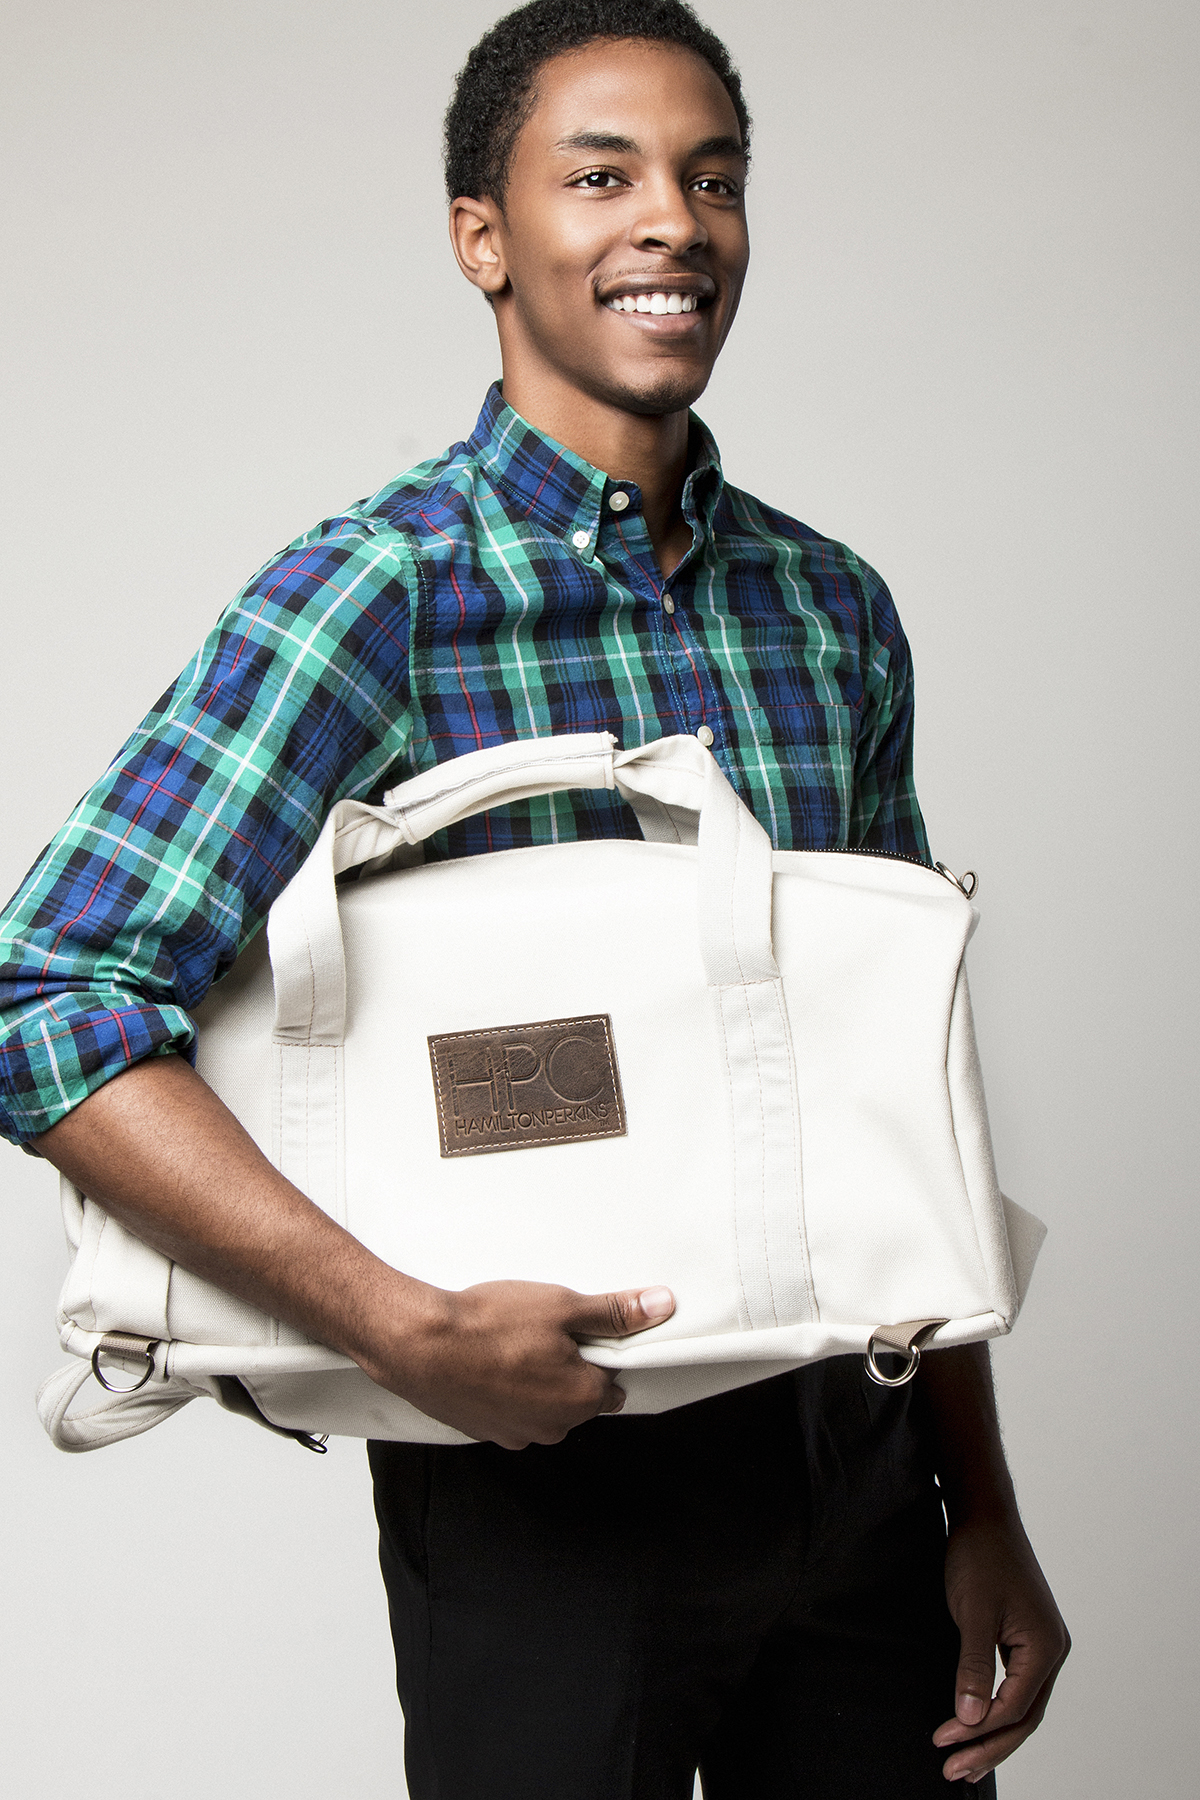 Modern, Stylish Bags Made From Recycled Bottles